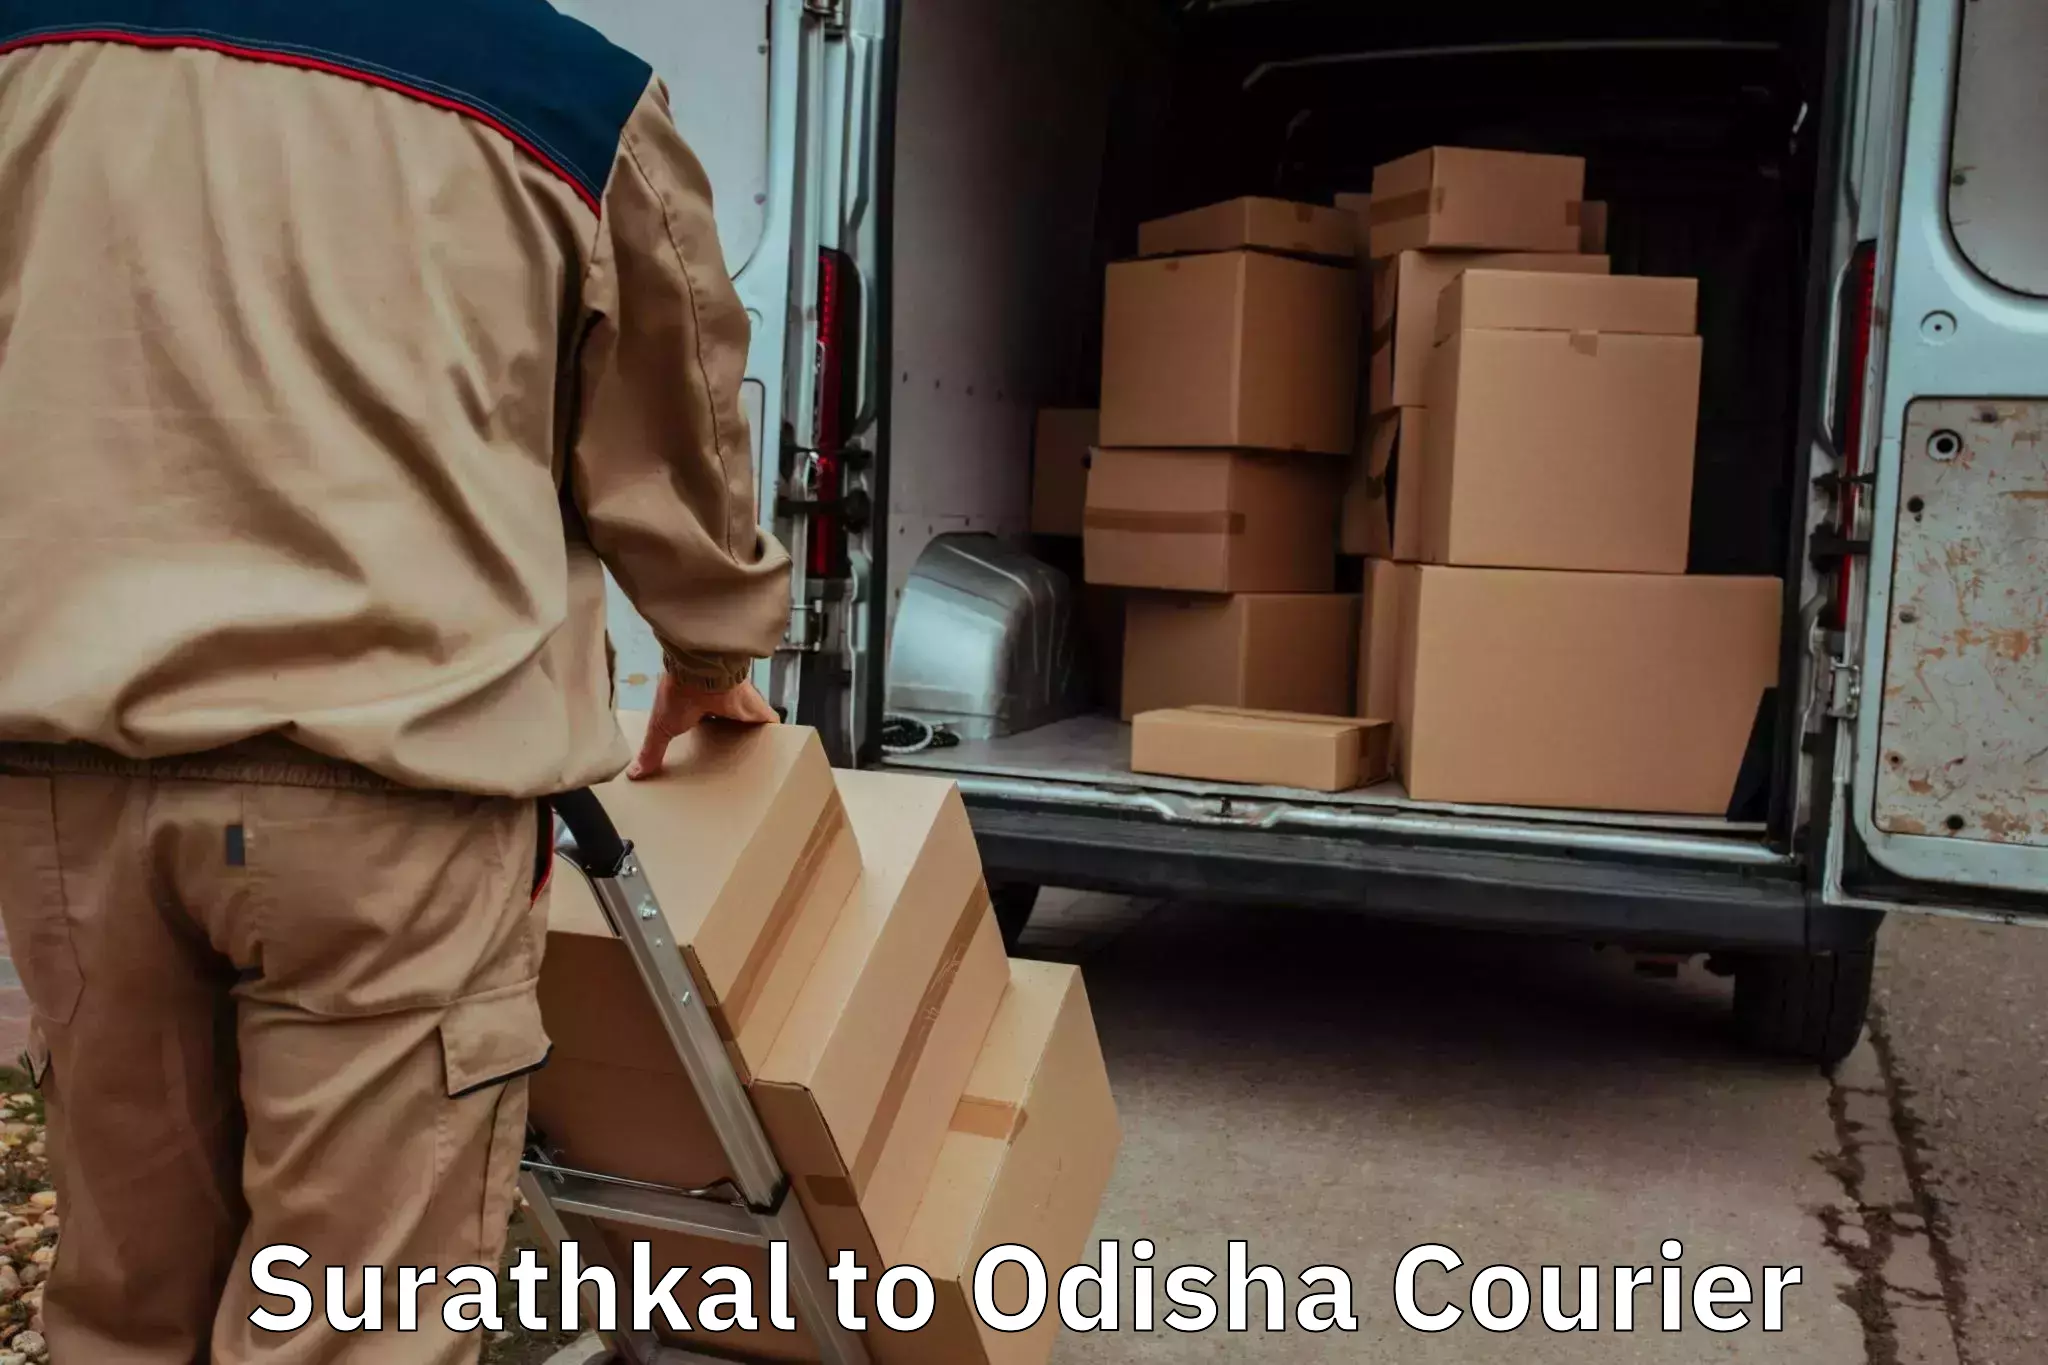 Reliable movers Surathkal to Ganjam